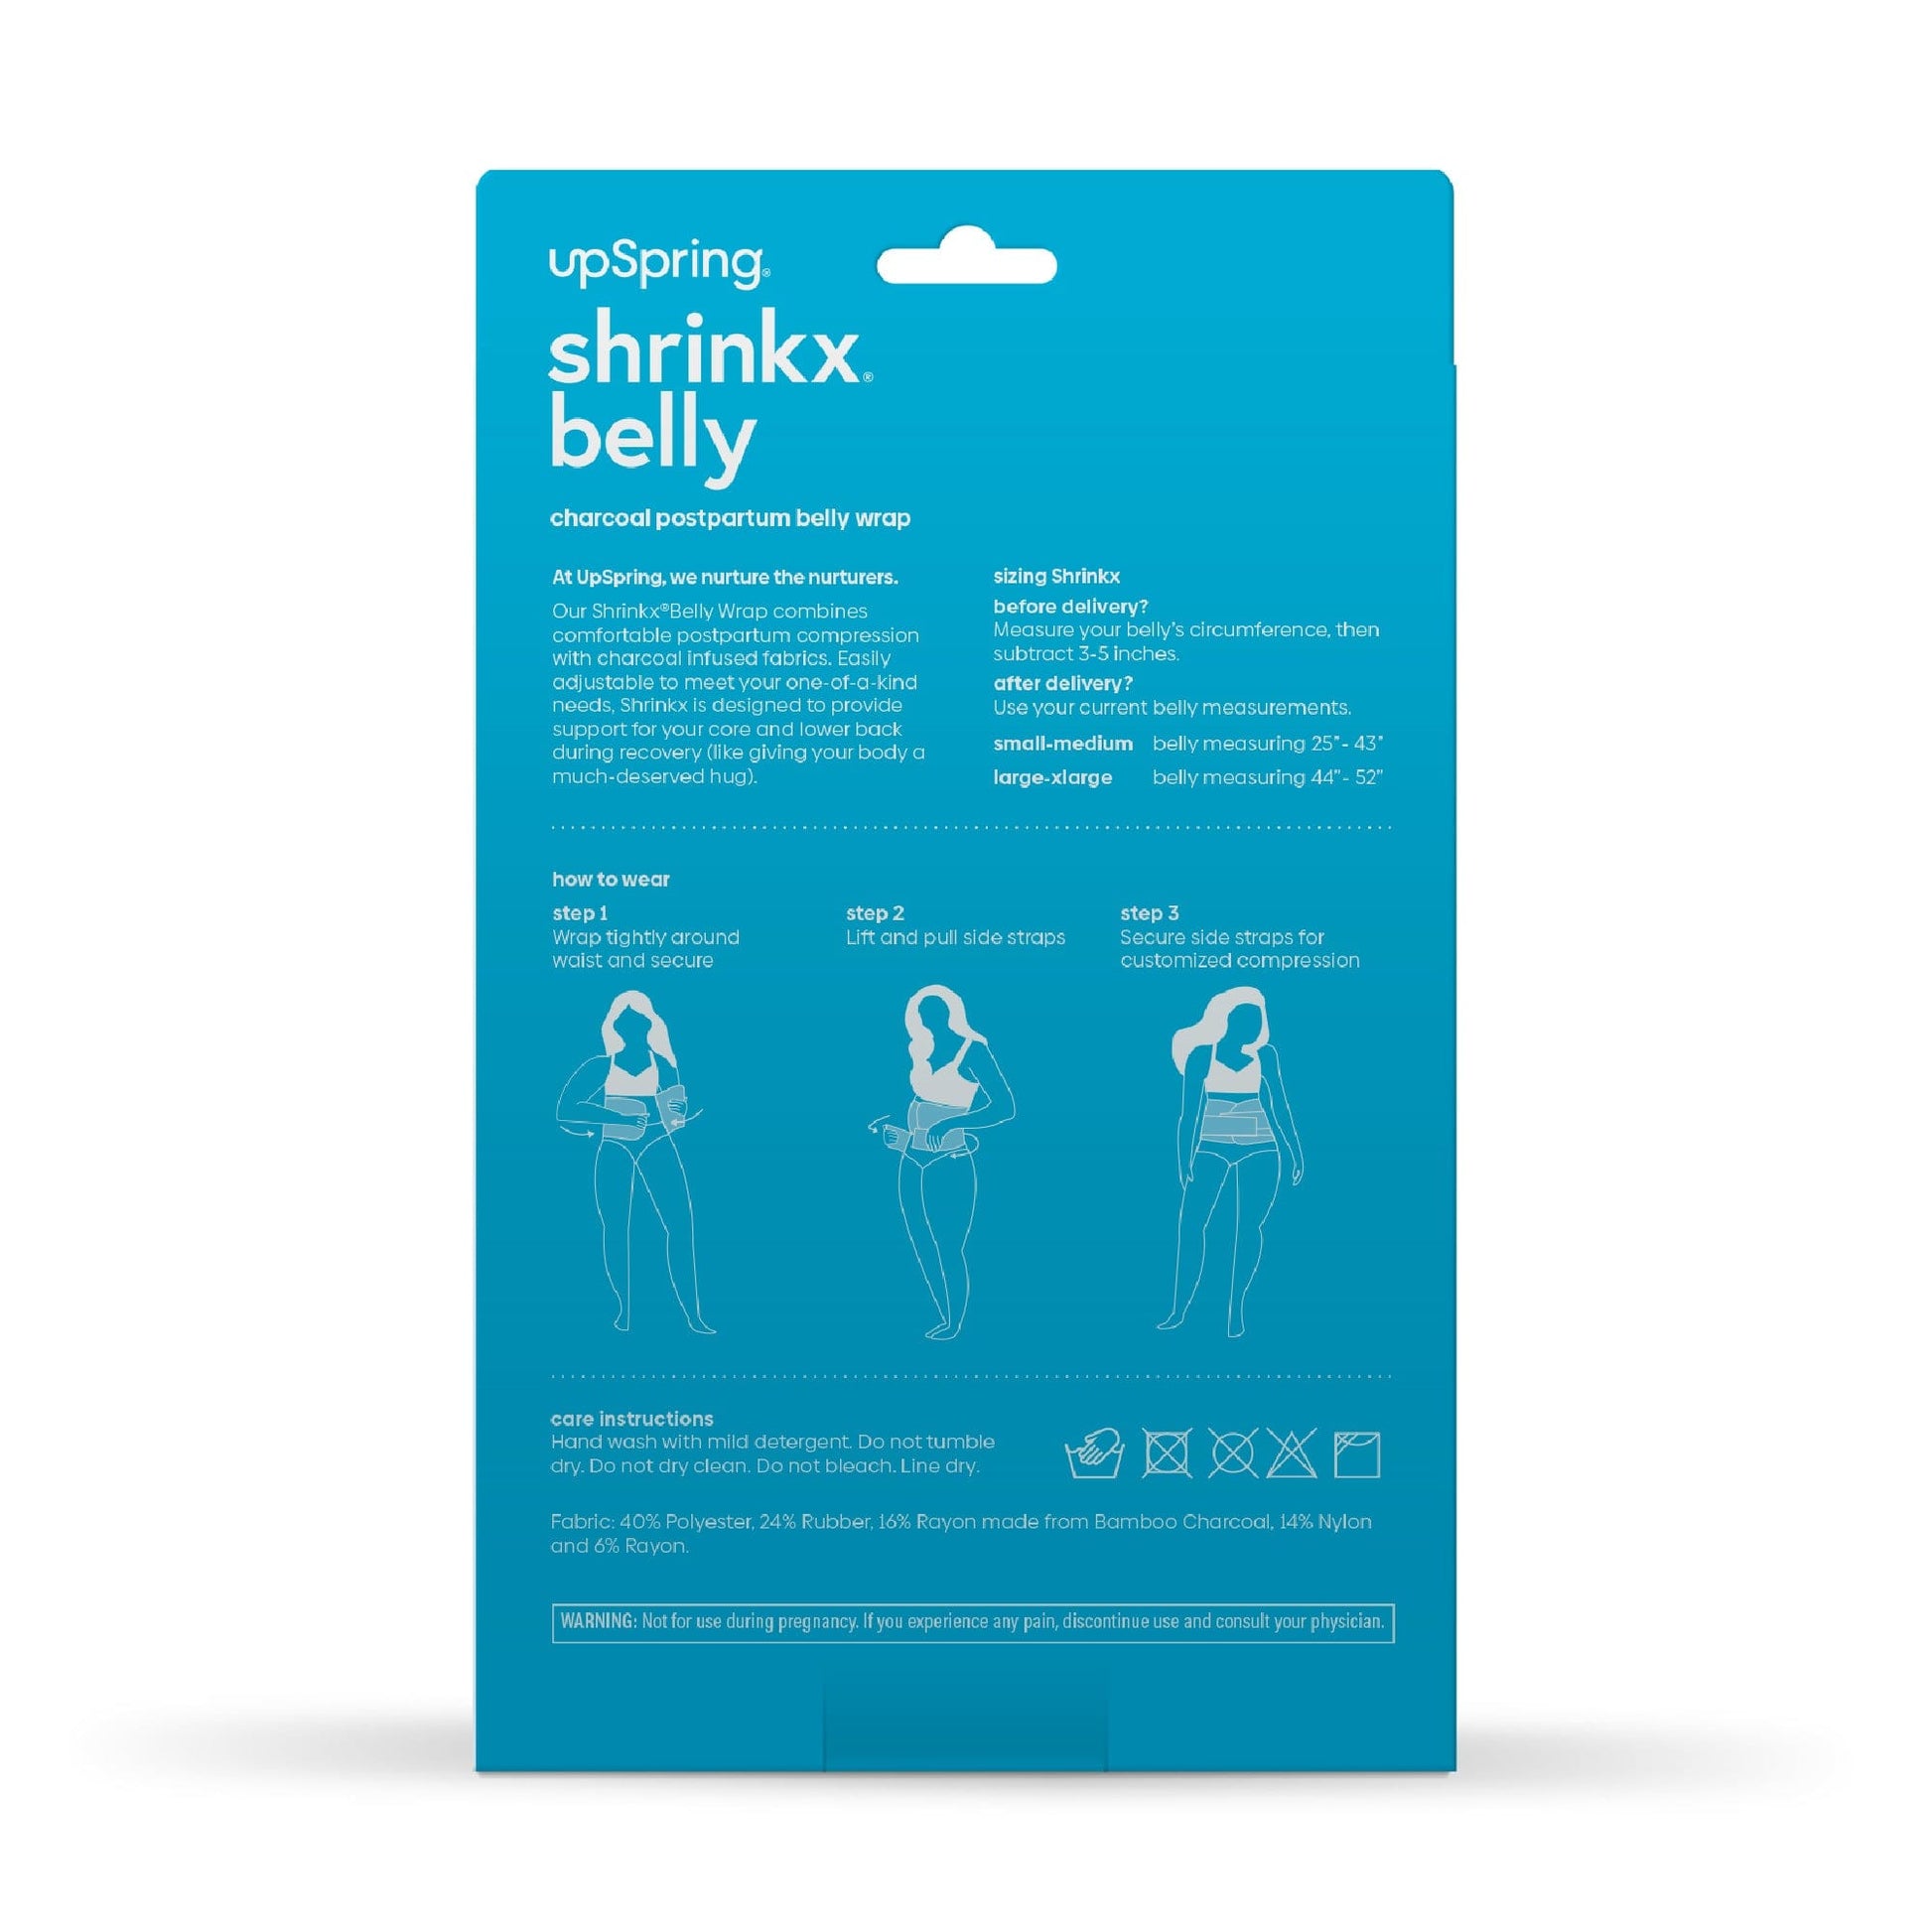 An image of the back of the Shrinkz product box